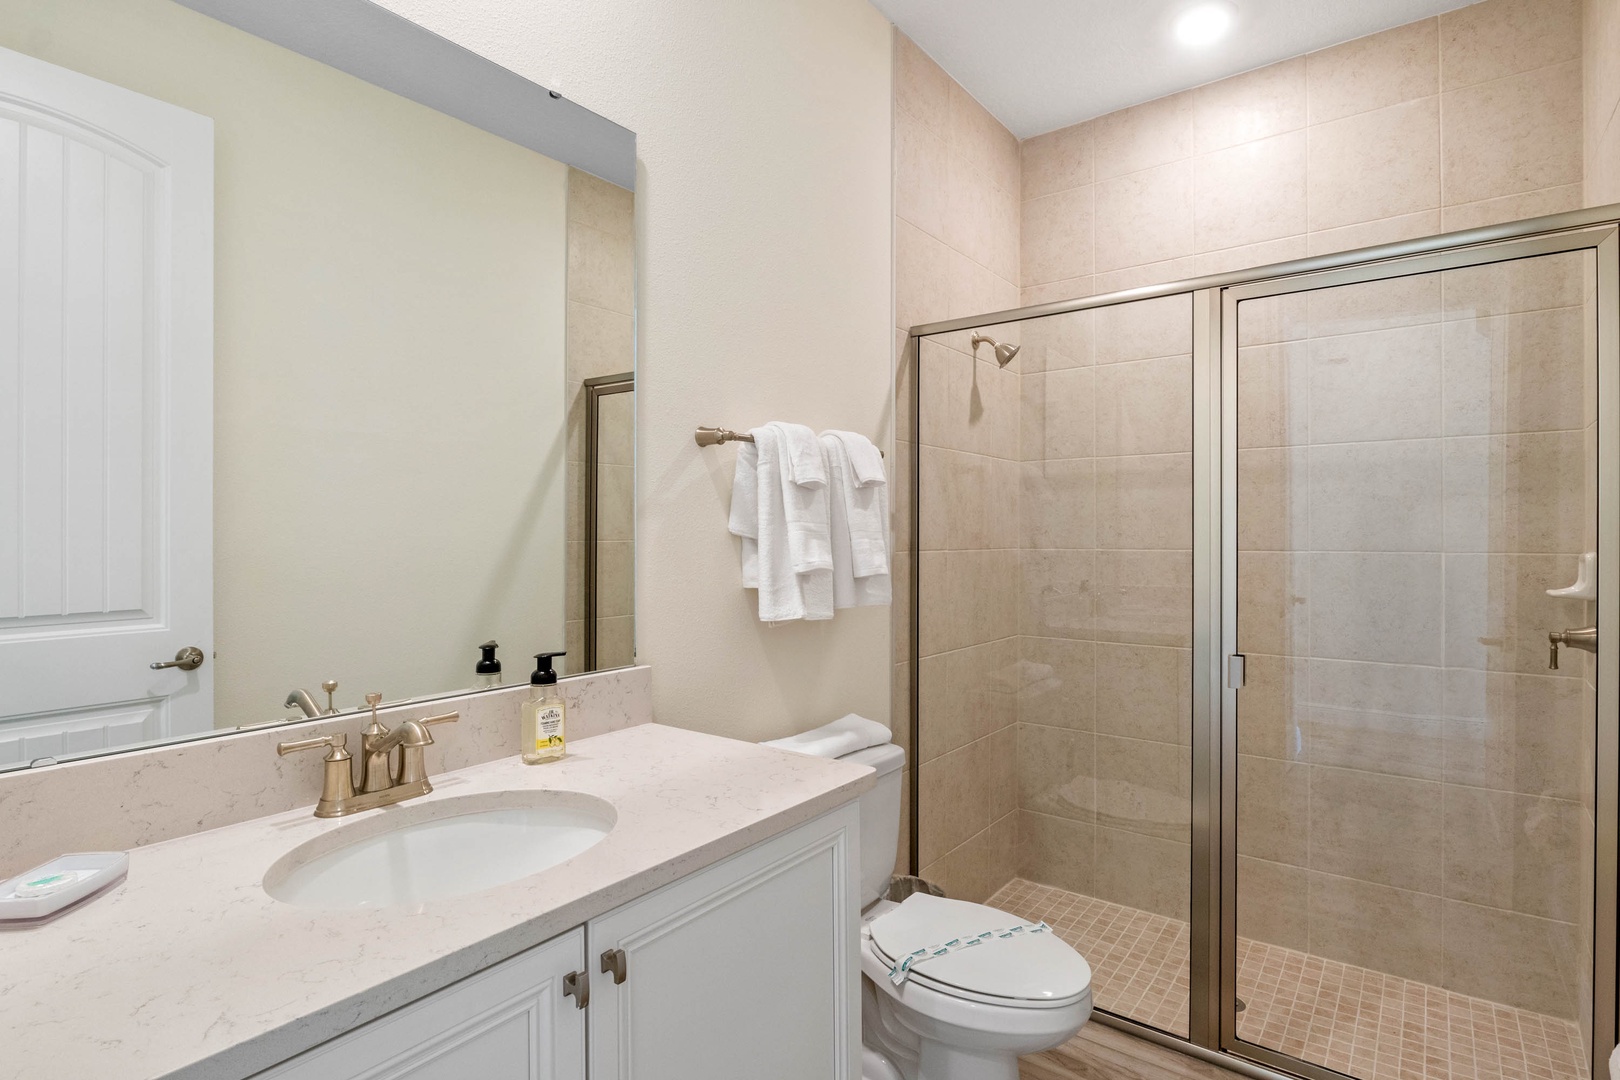 Shared Bathroom with Single Vanity and Glass-Enclosed Shower